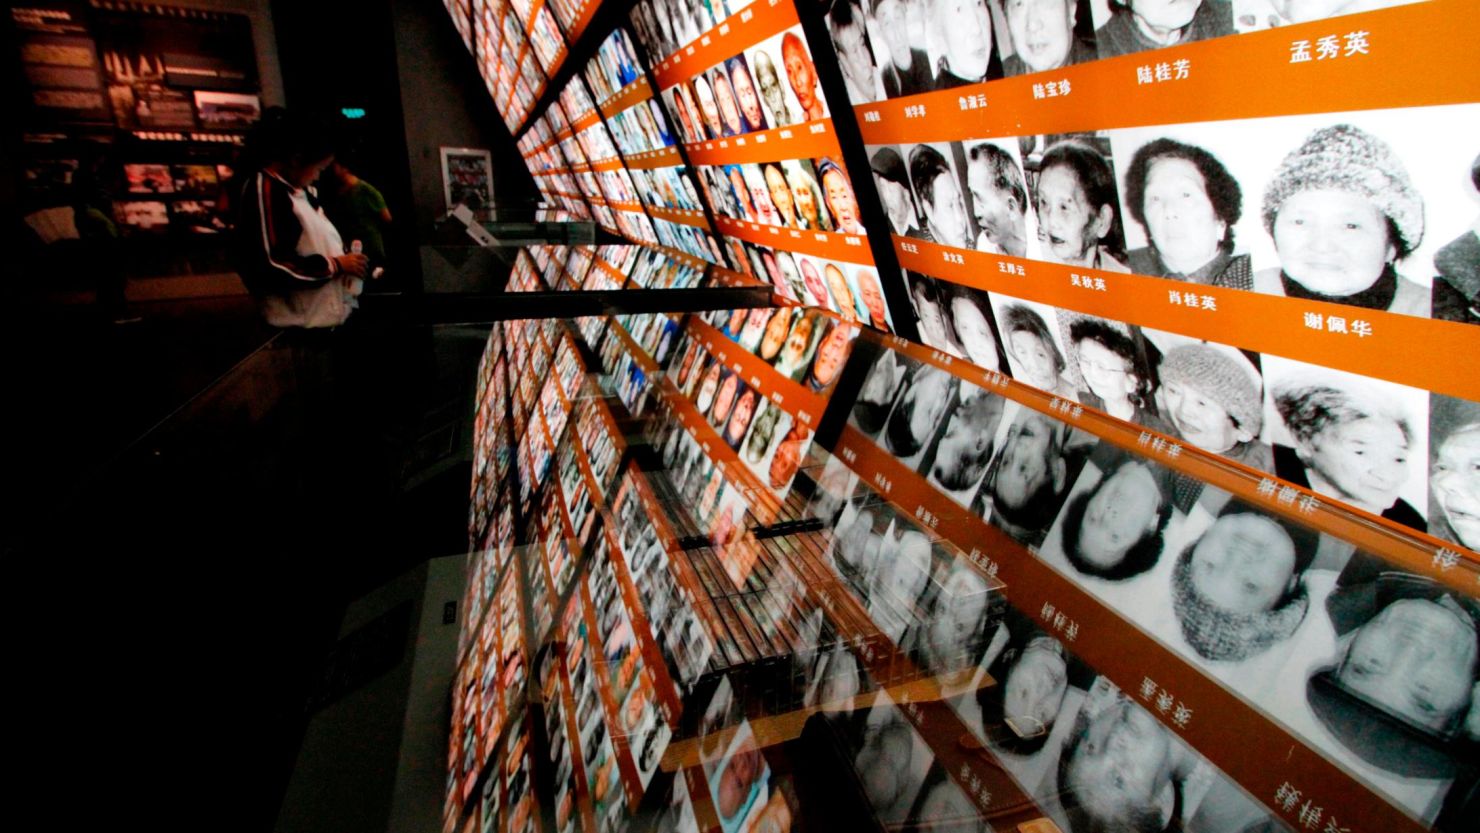 Photos of survivors are seen on display at the Nanjing Massacre Memorial Hall in Nanjing on October 10, 2015.  